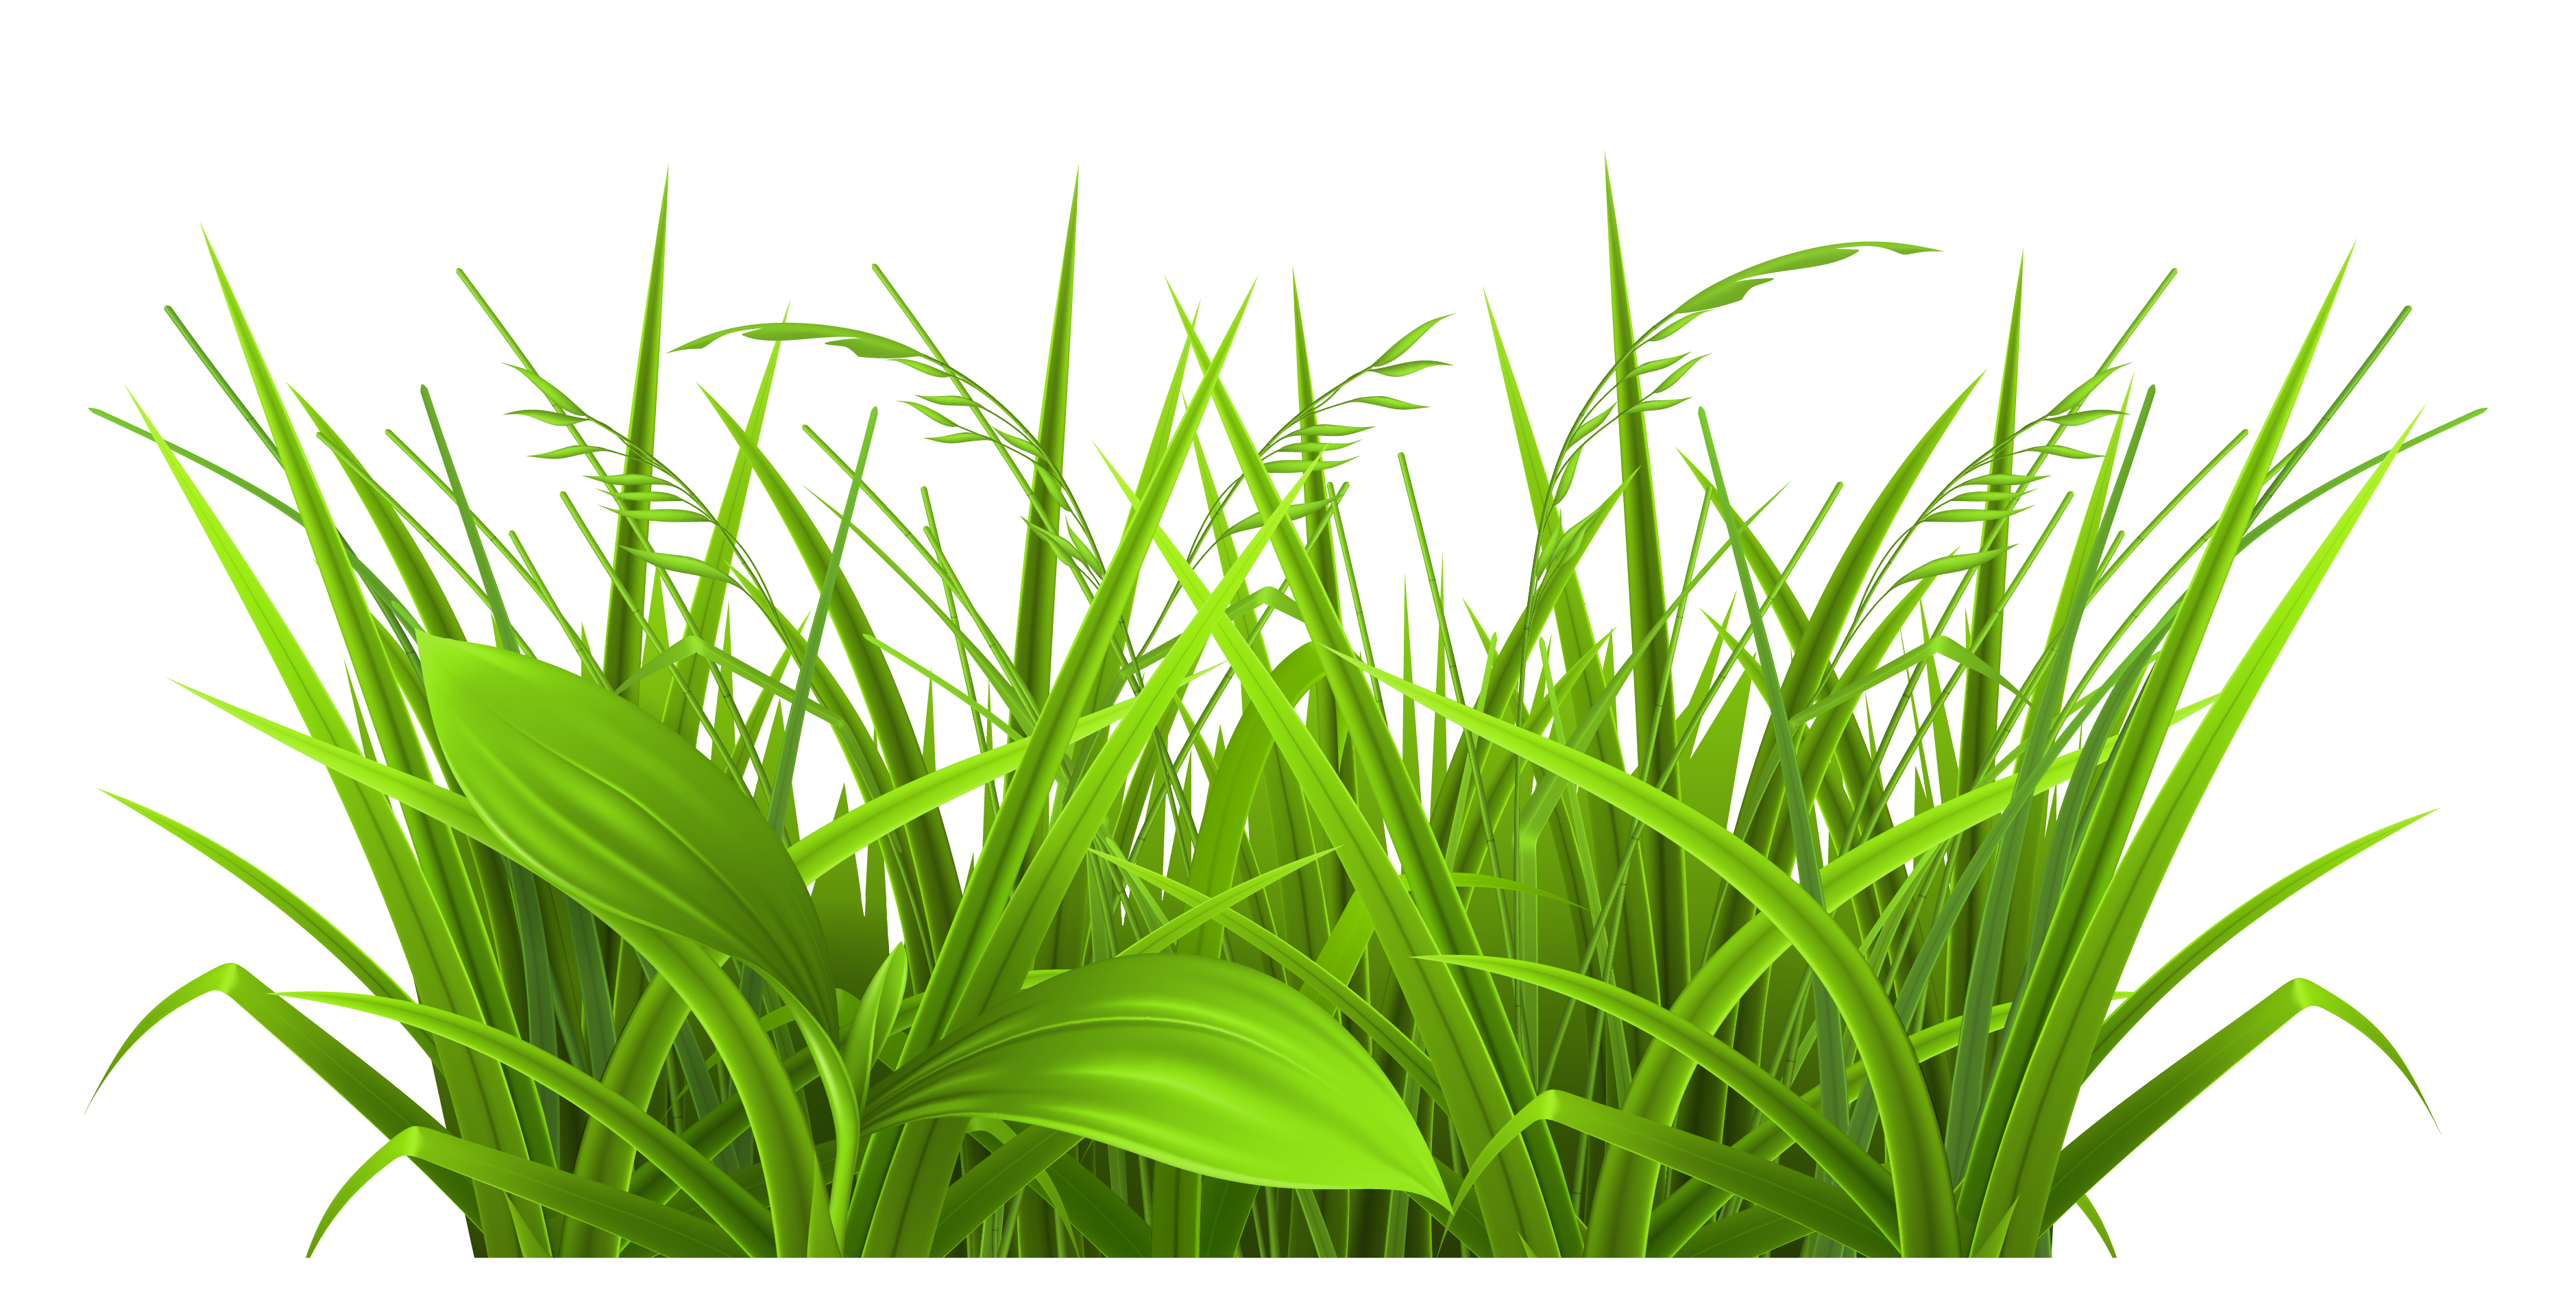 15 Cartoon Grass Free Cliparts That You Can Download To You Computer